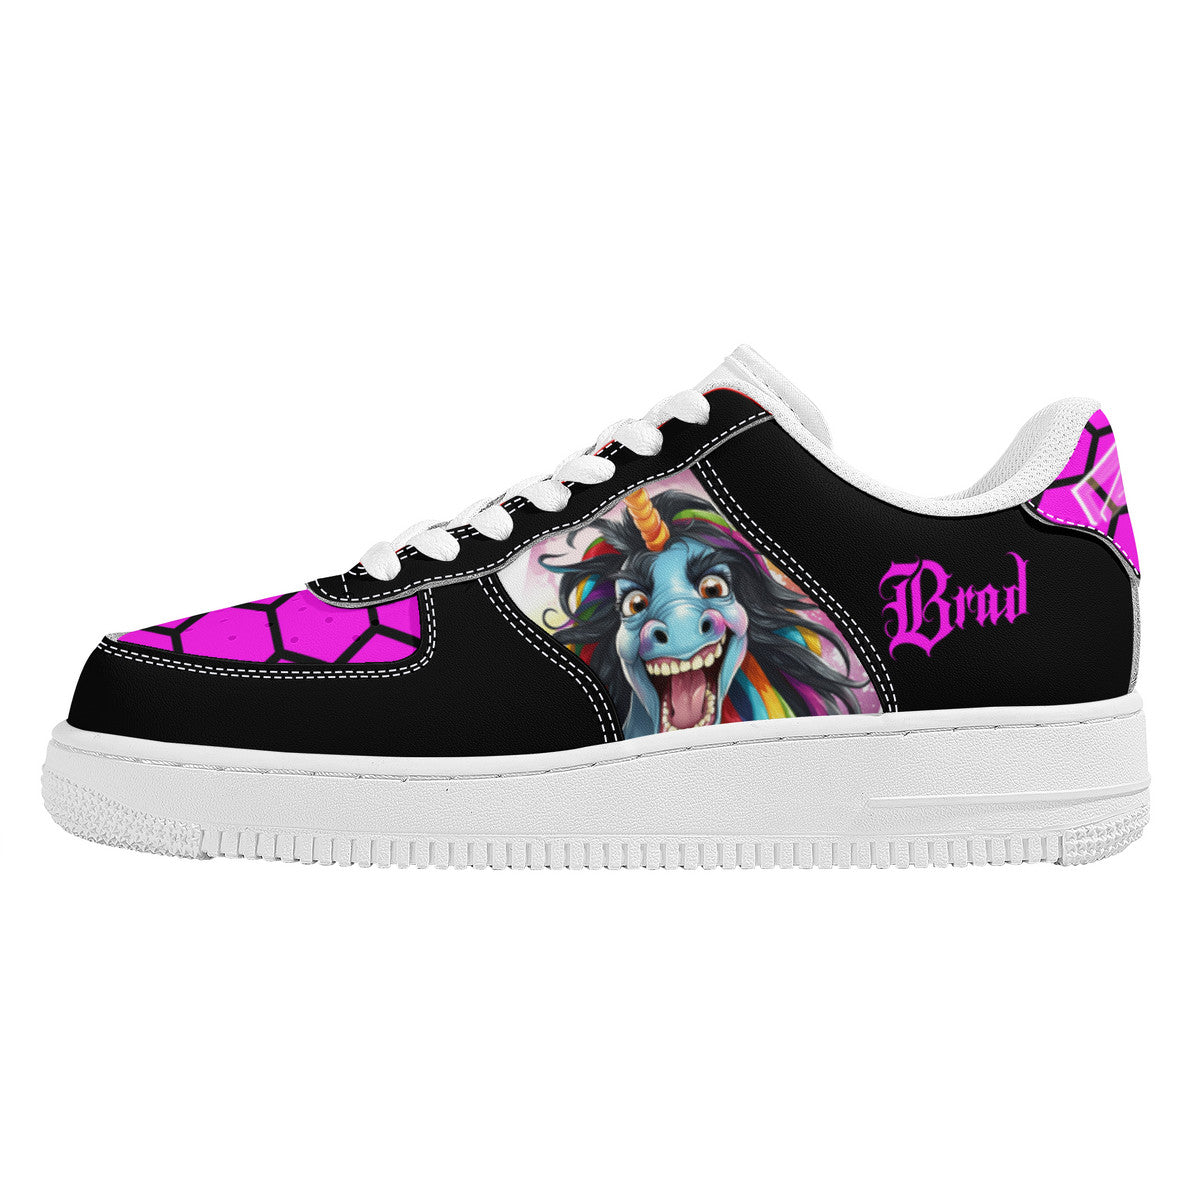 RVT Low Top Unisex Sneaker- for the homie "Brad"